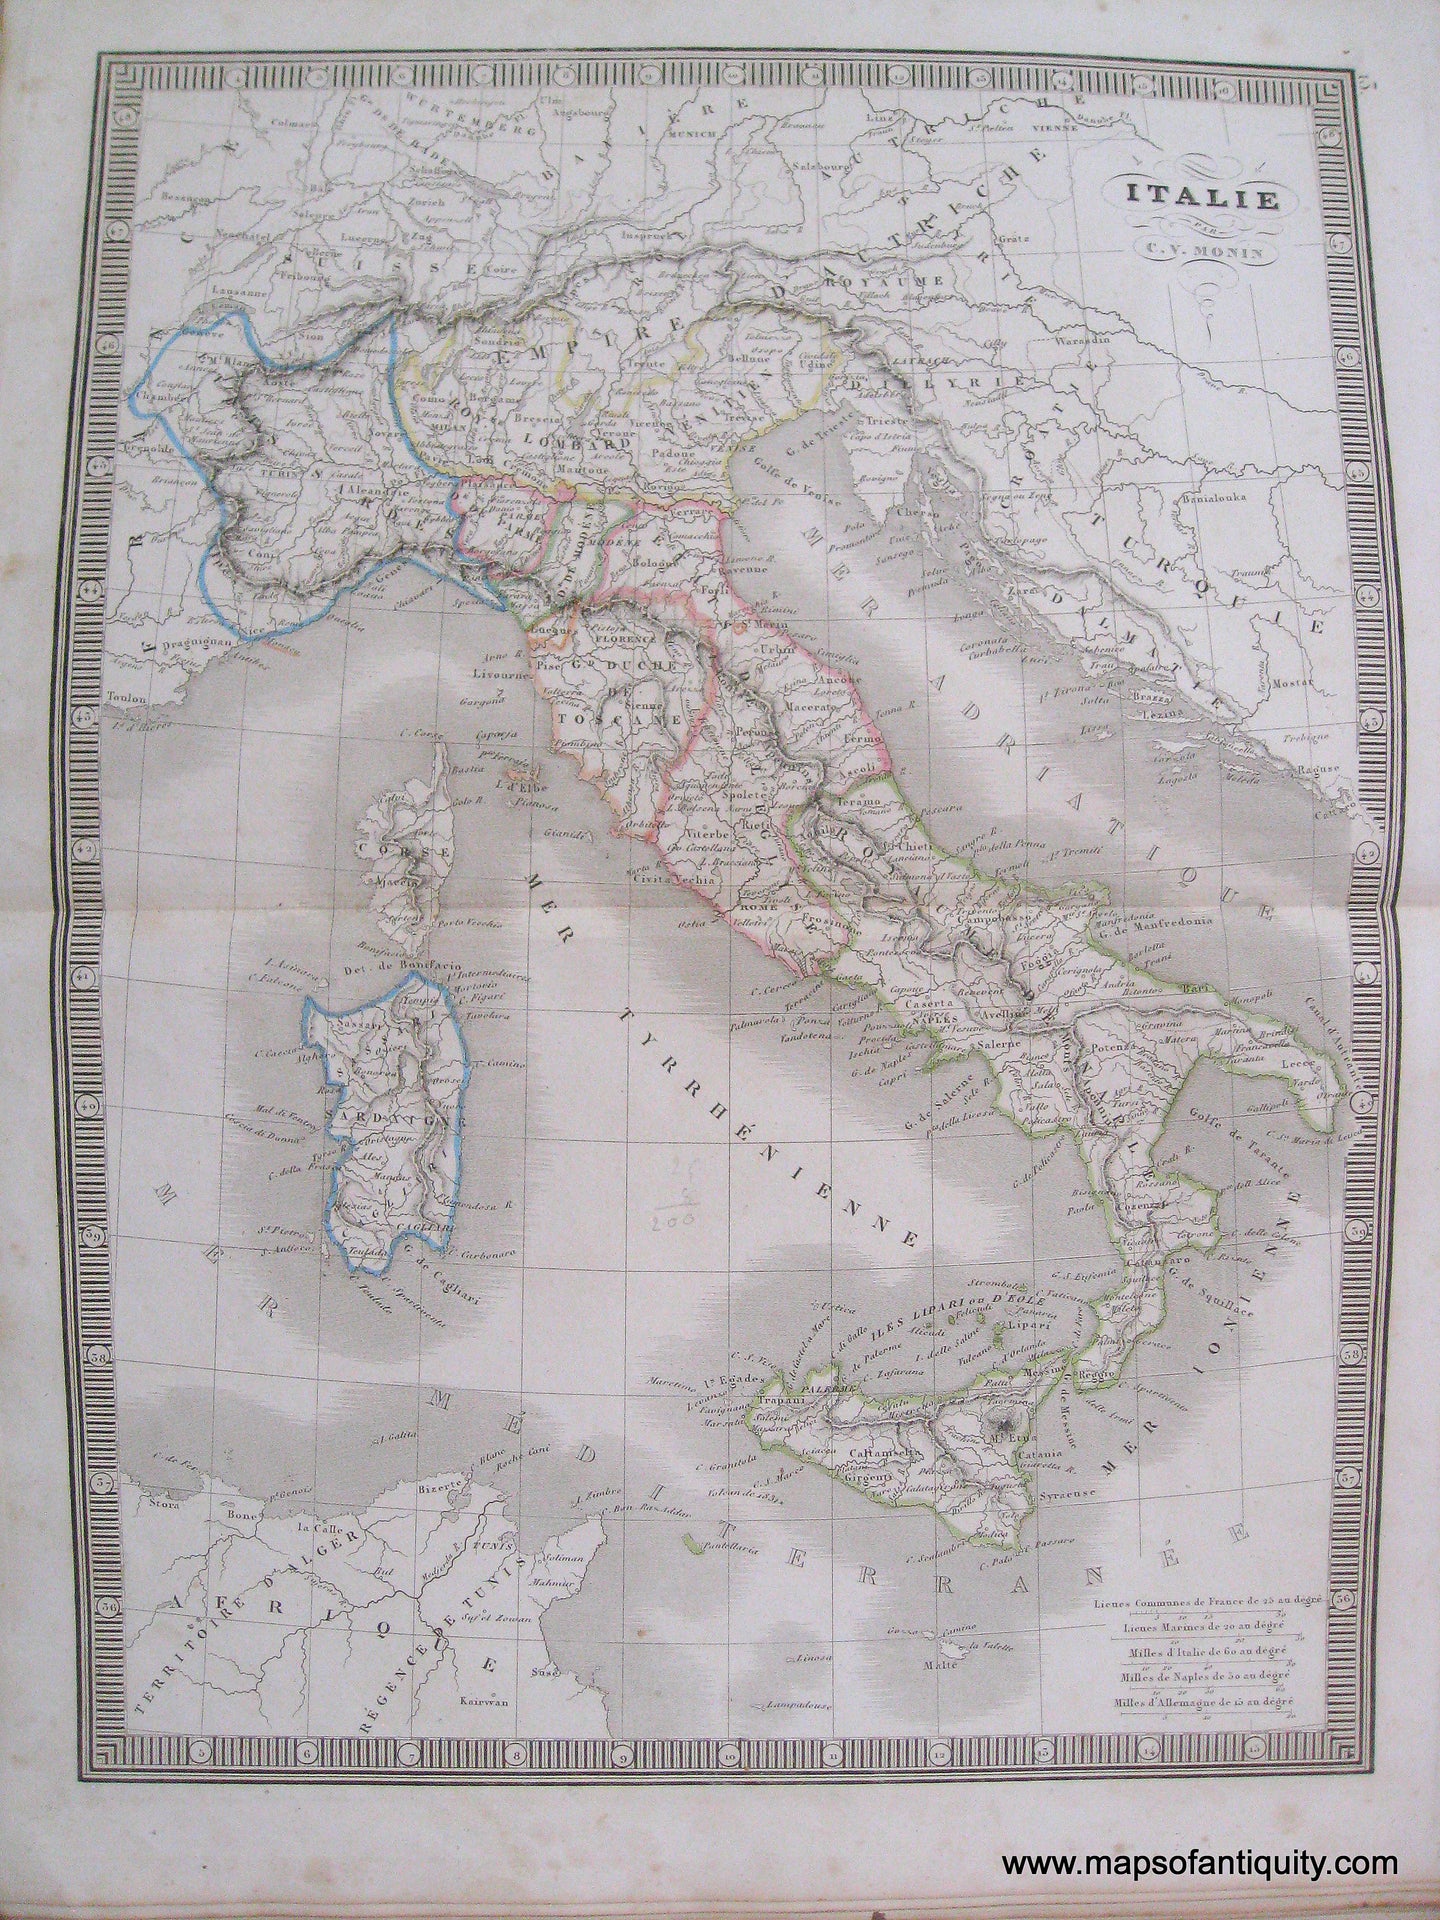 Antique-Hand-Colored-Map-Italie-(Italy)-1846-Monin-1800s-19th-century-Maps-of-Antiquity